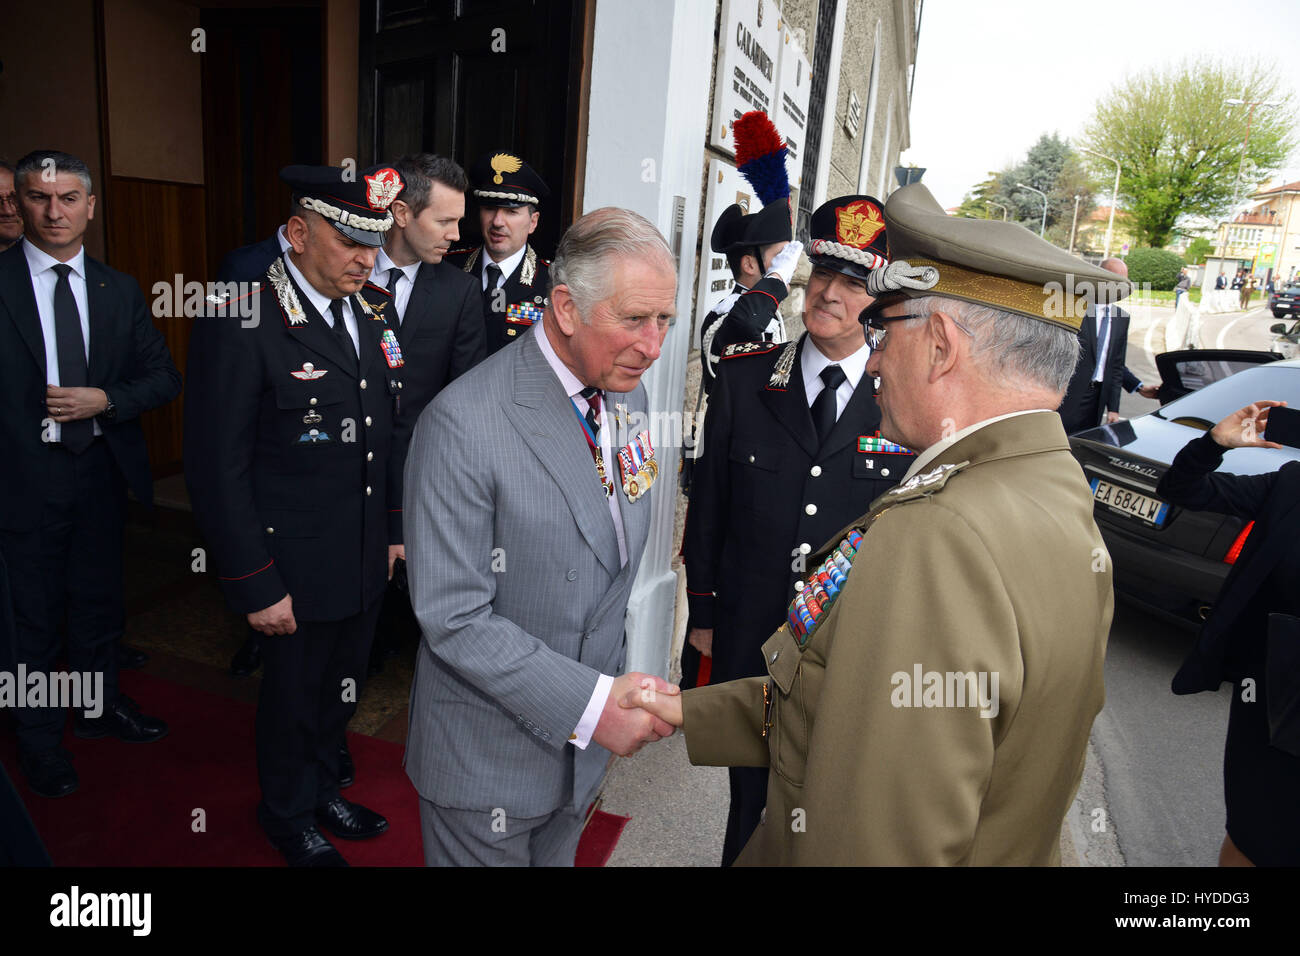 Charles, Prince of Wales meets Gen. Claudio Graziano, Italian Army Chief of Staff, right, during a visit to the Center of Excellence for Stability Police Units April 1, 2017 in Vicenza, Italy. The center is a train the trainer school developed by the Carabinieri for peace-keeping missions around the world. Stock Photo